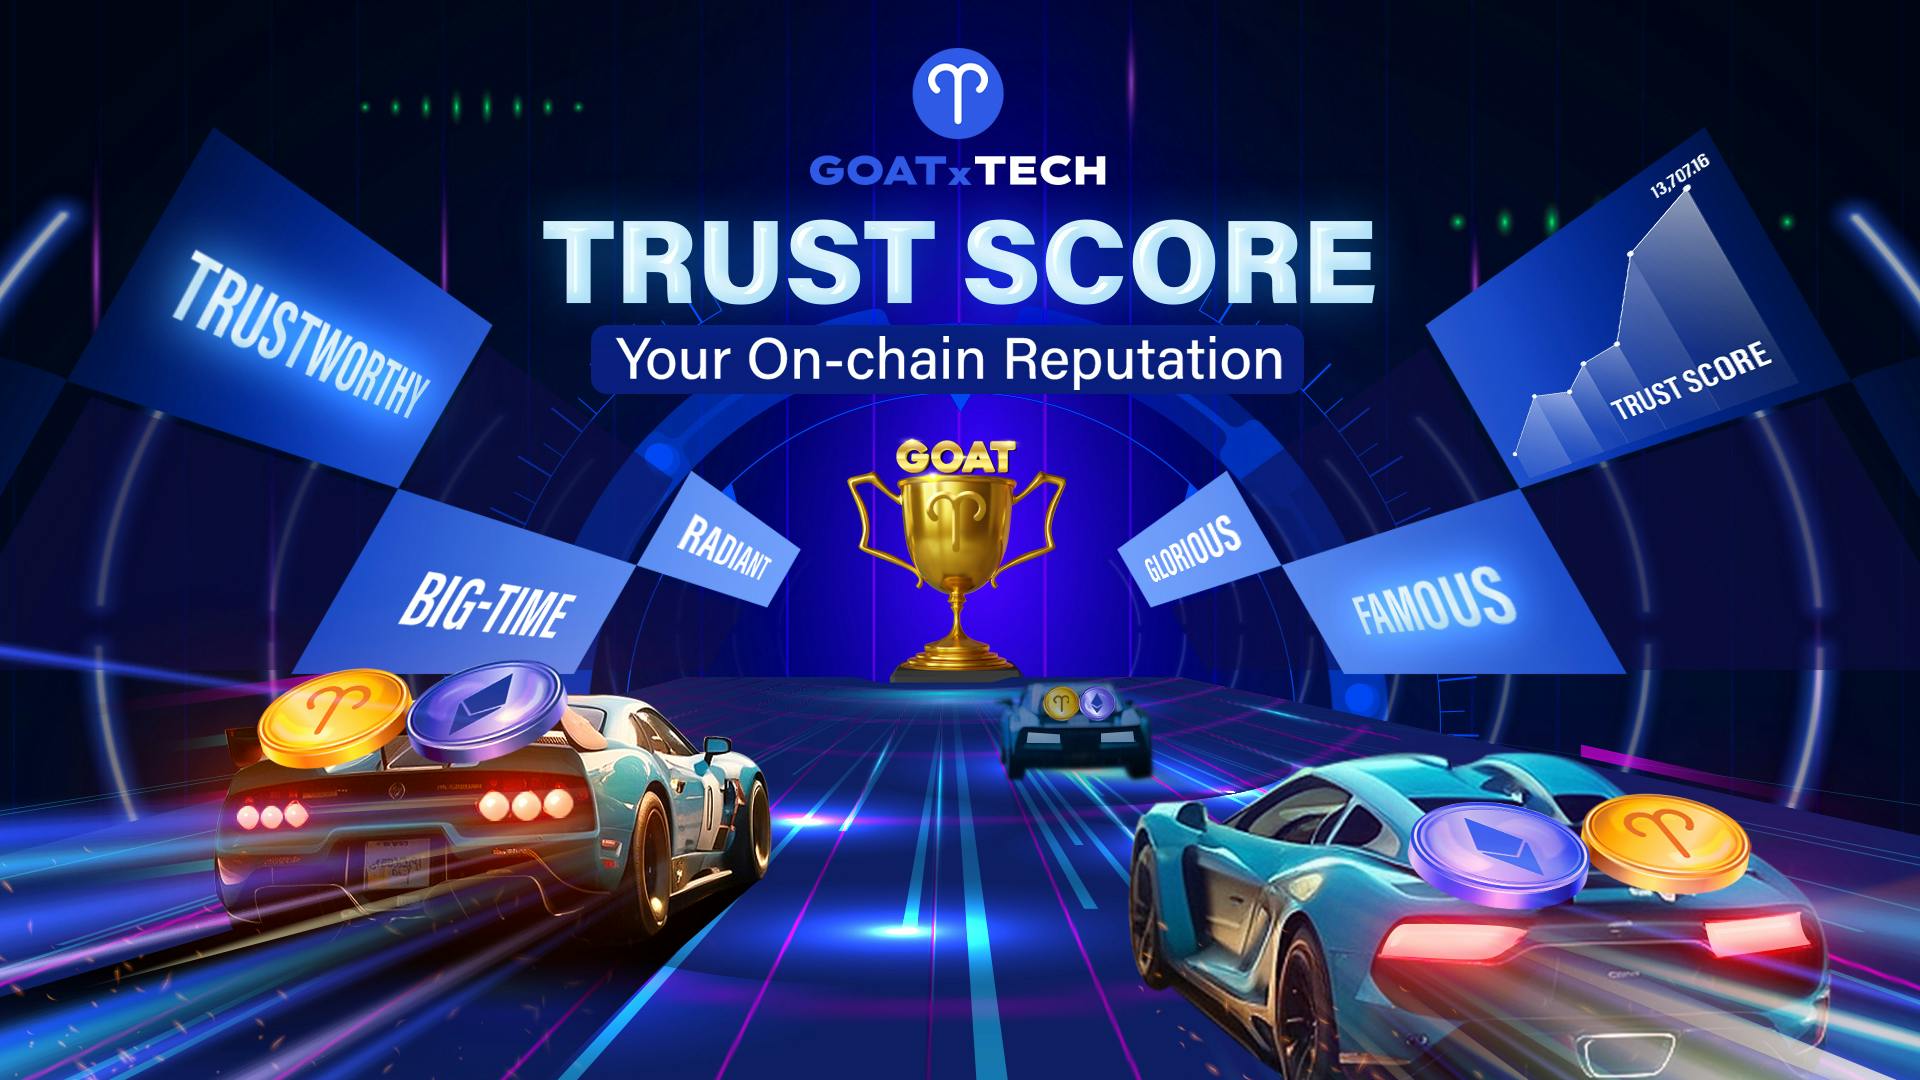 Trust Score, your on-chain reputation, is the foundation of every Goat.Tech feature and interaction.